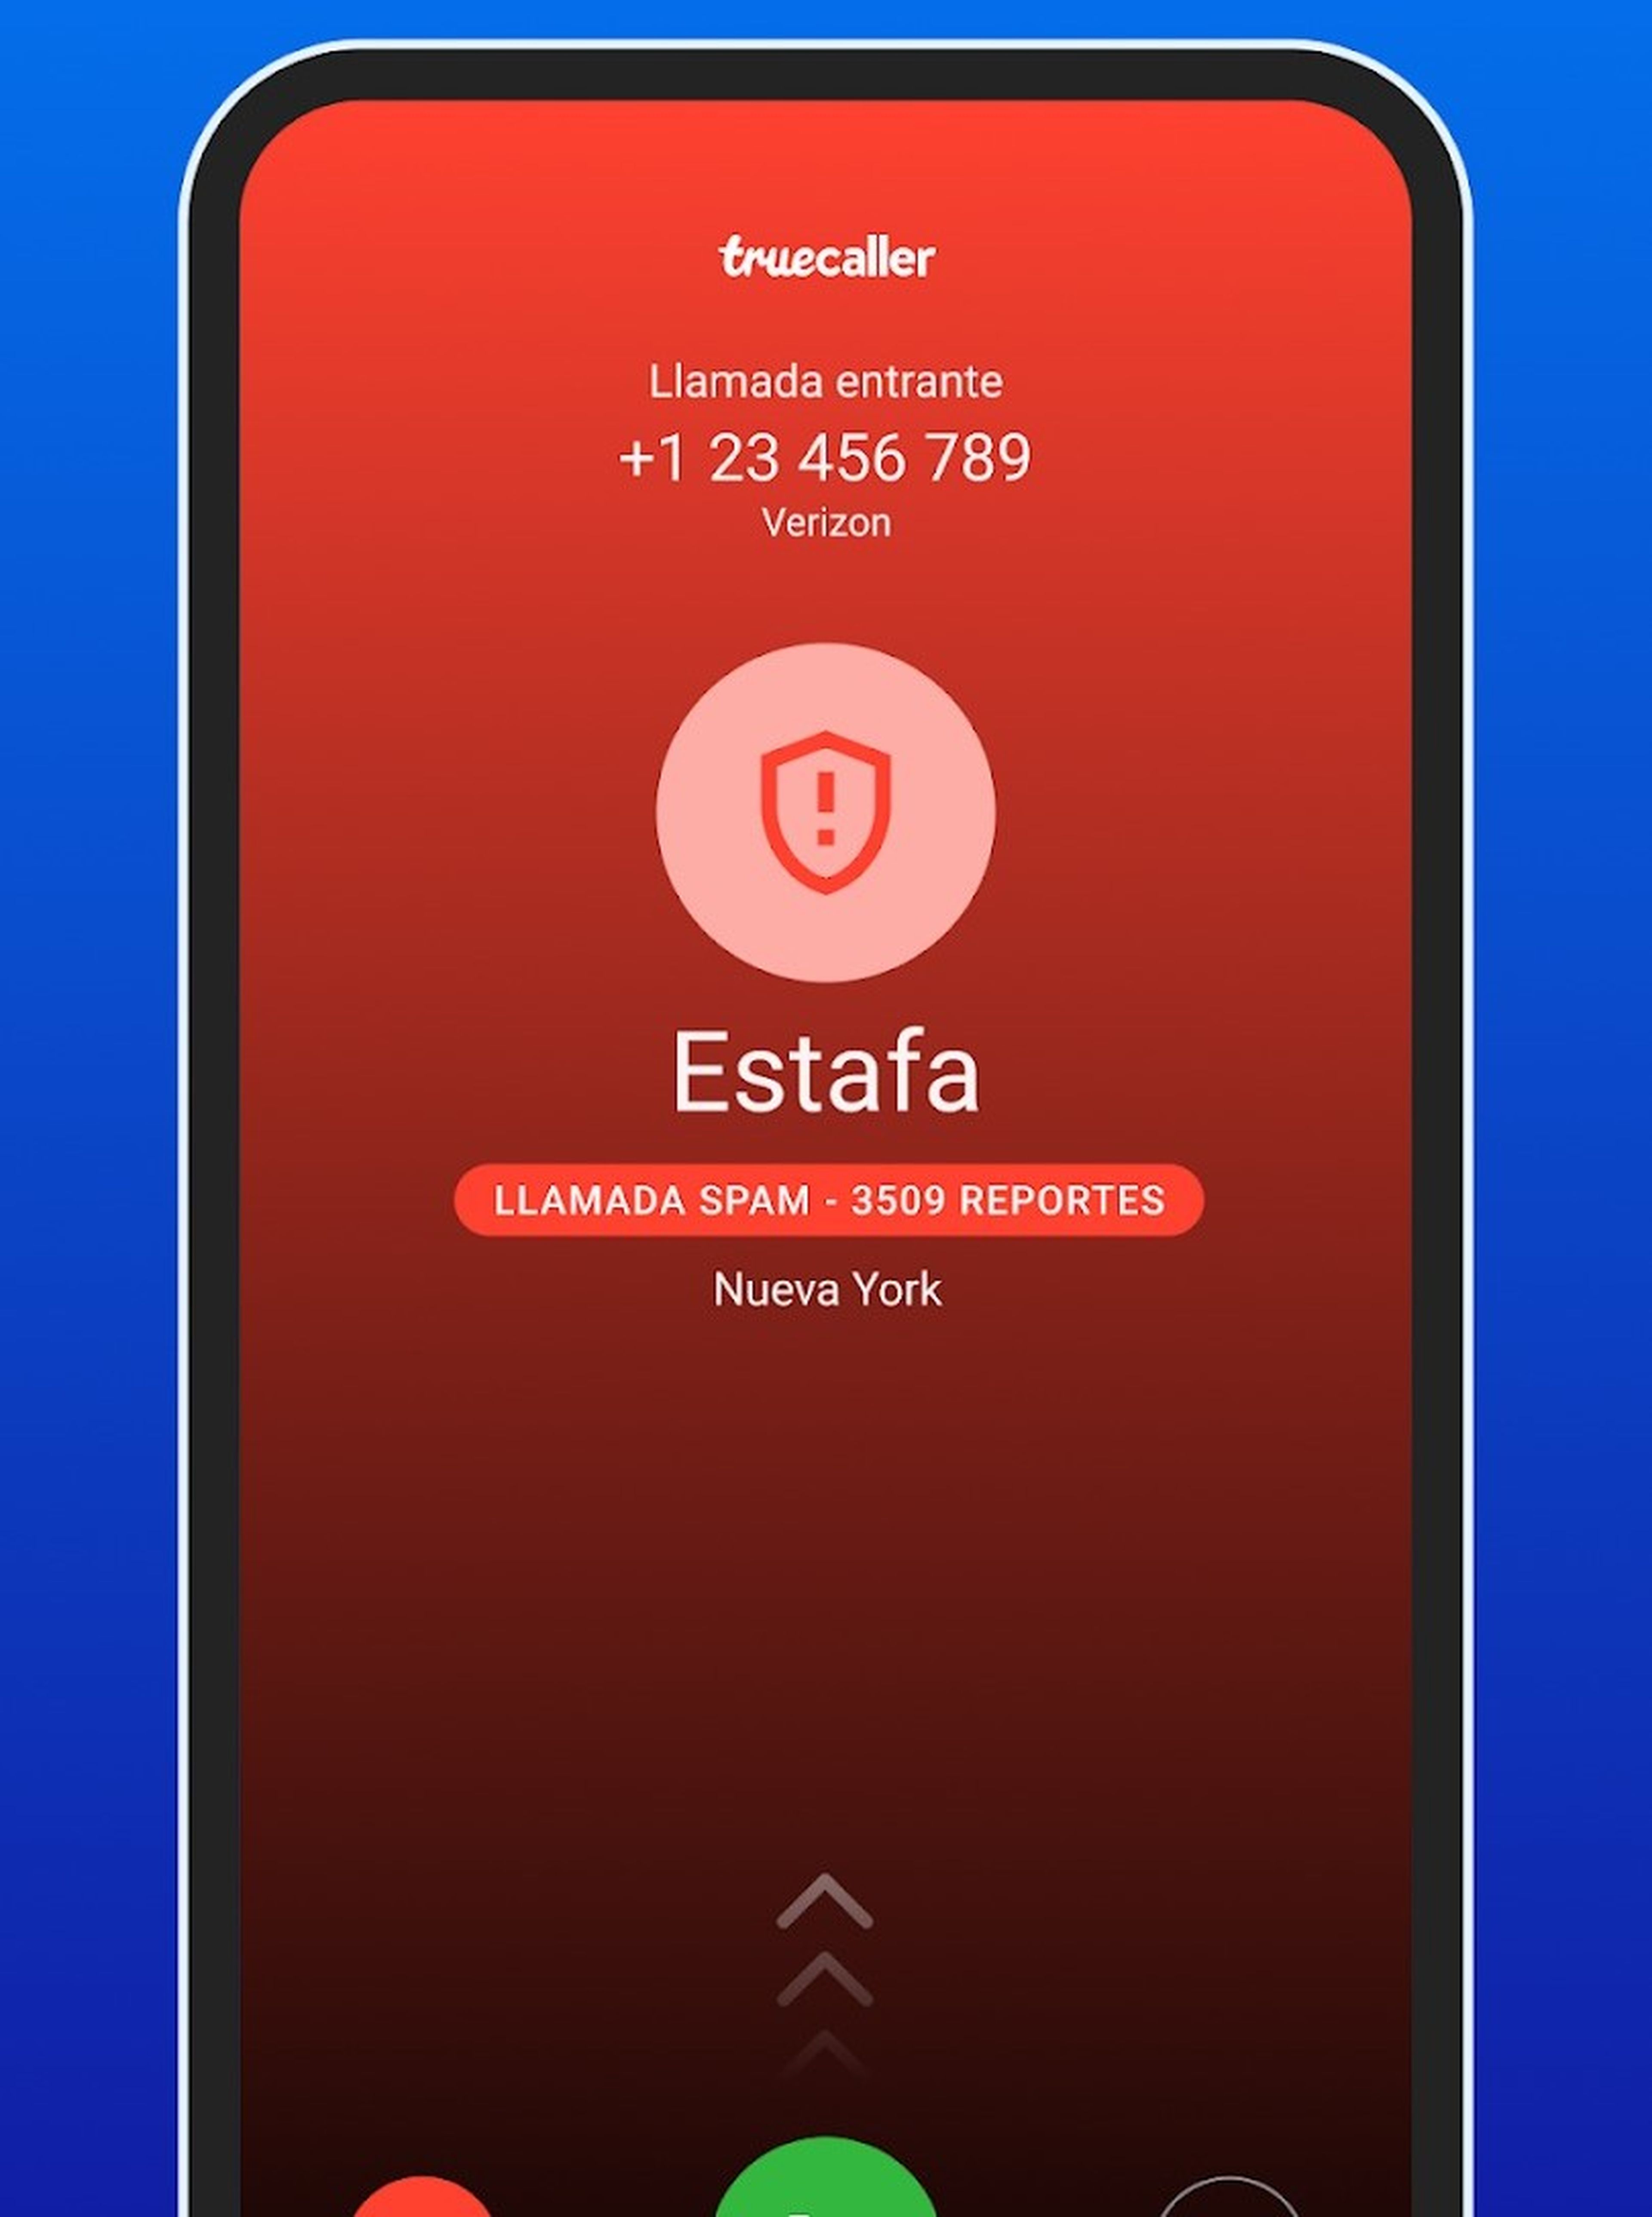 Access your blocked numbers with Truecaller